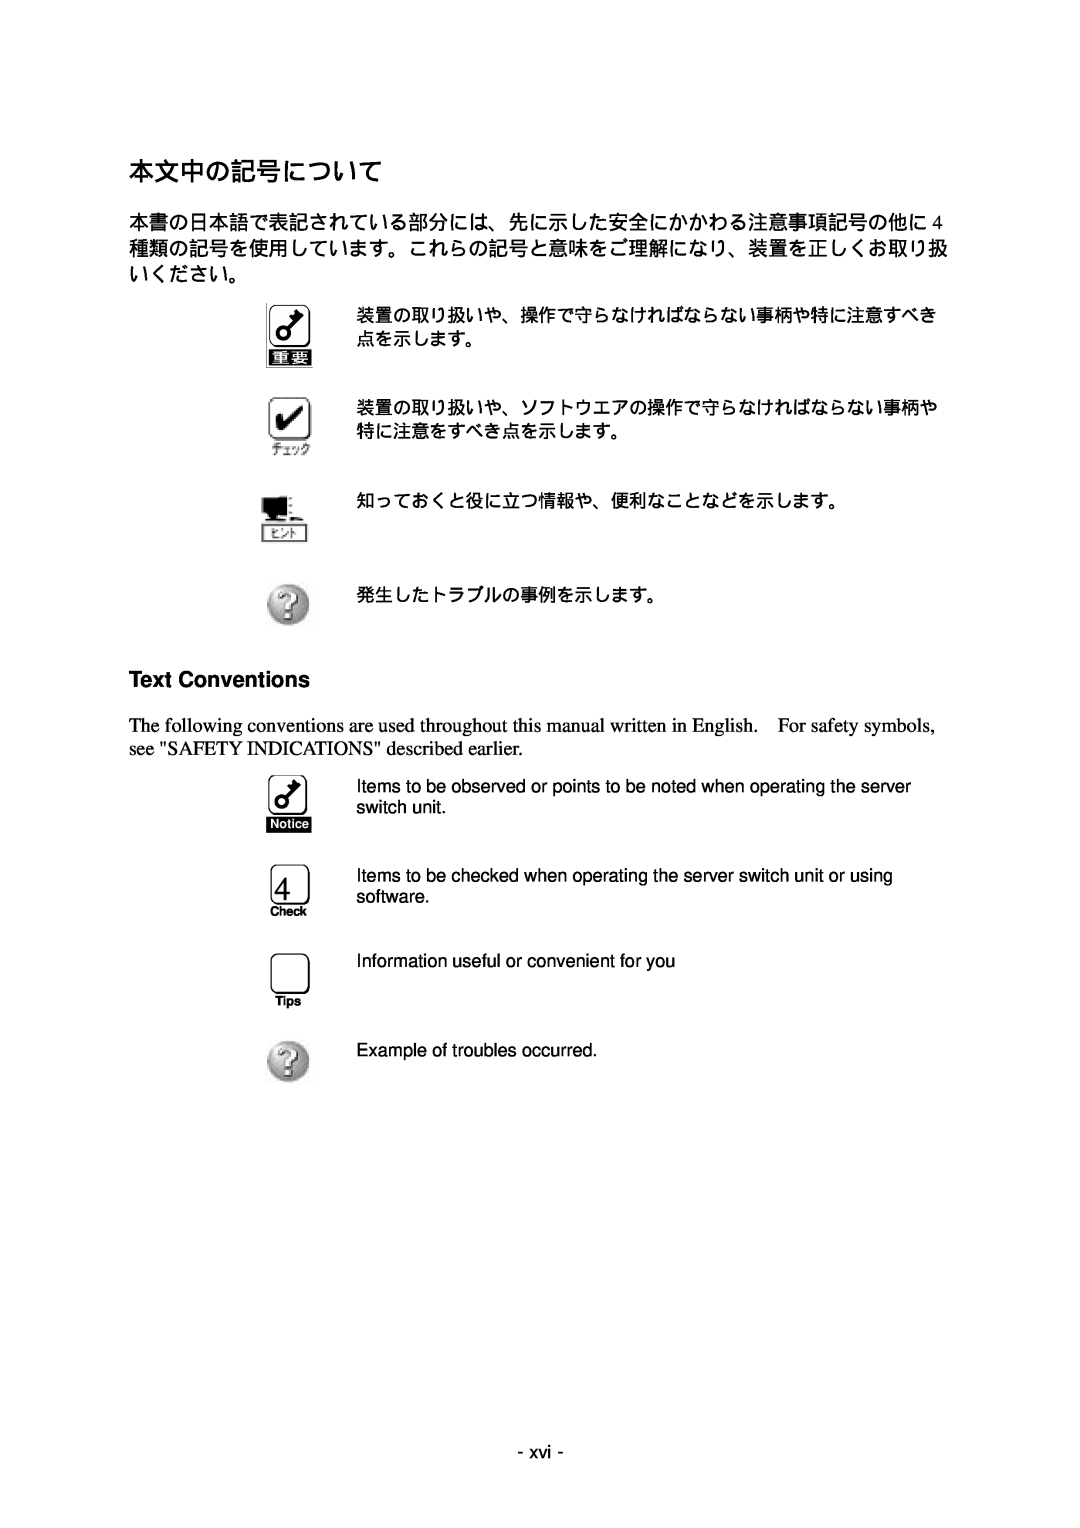 NEC N8191-09 manual 本文中の記号について, Text Conventions 